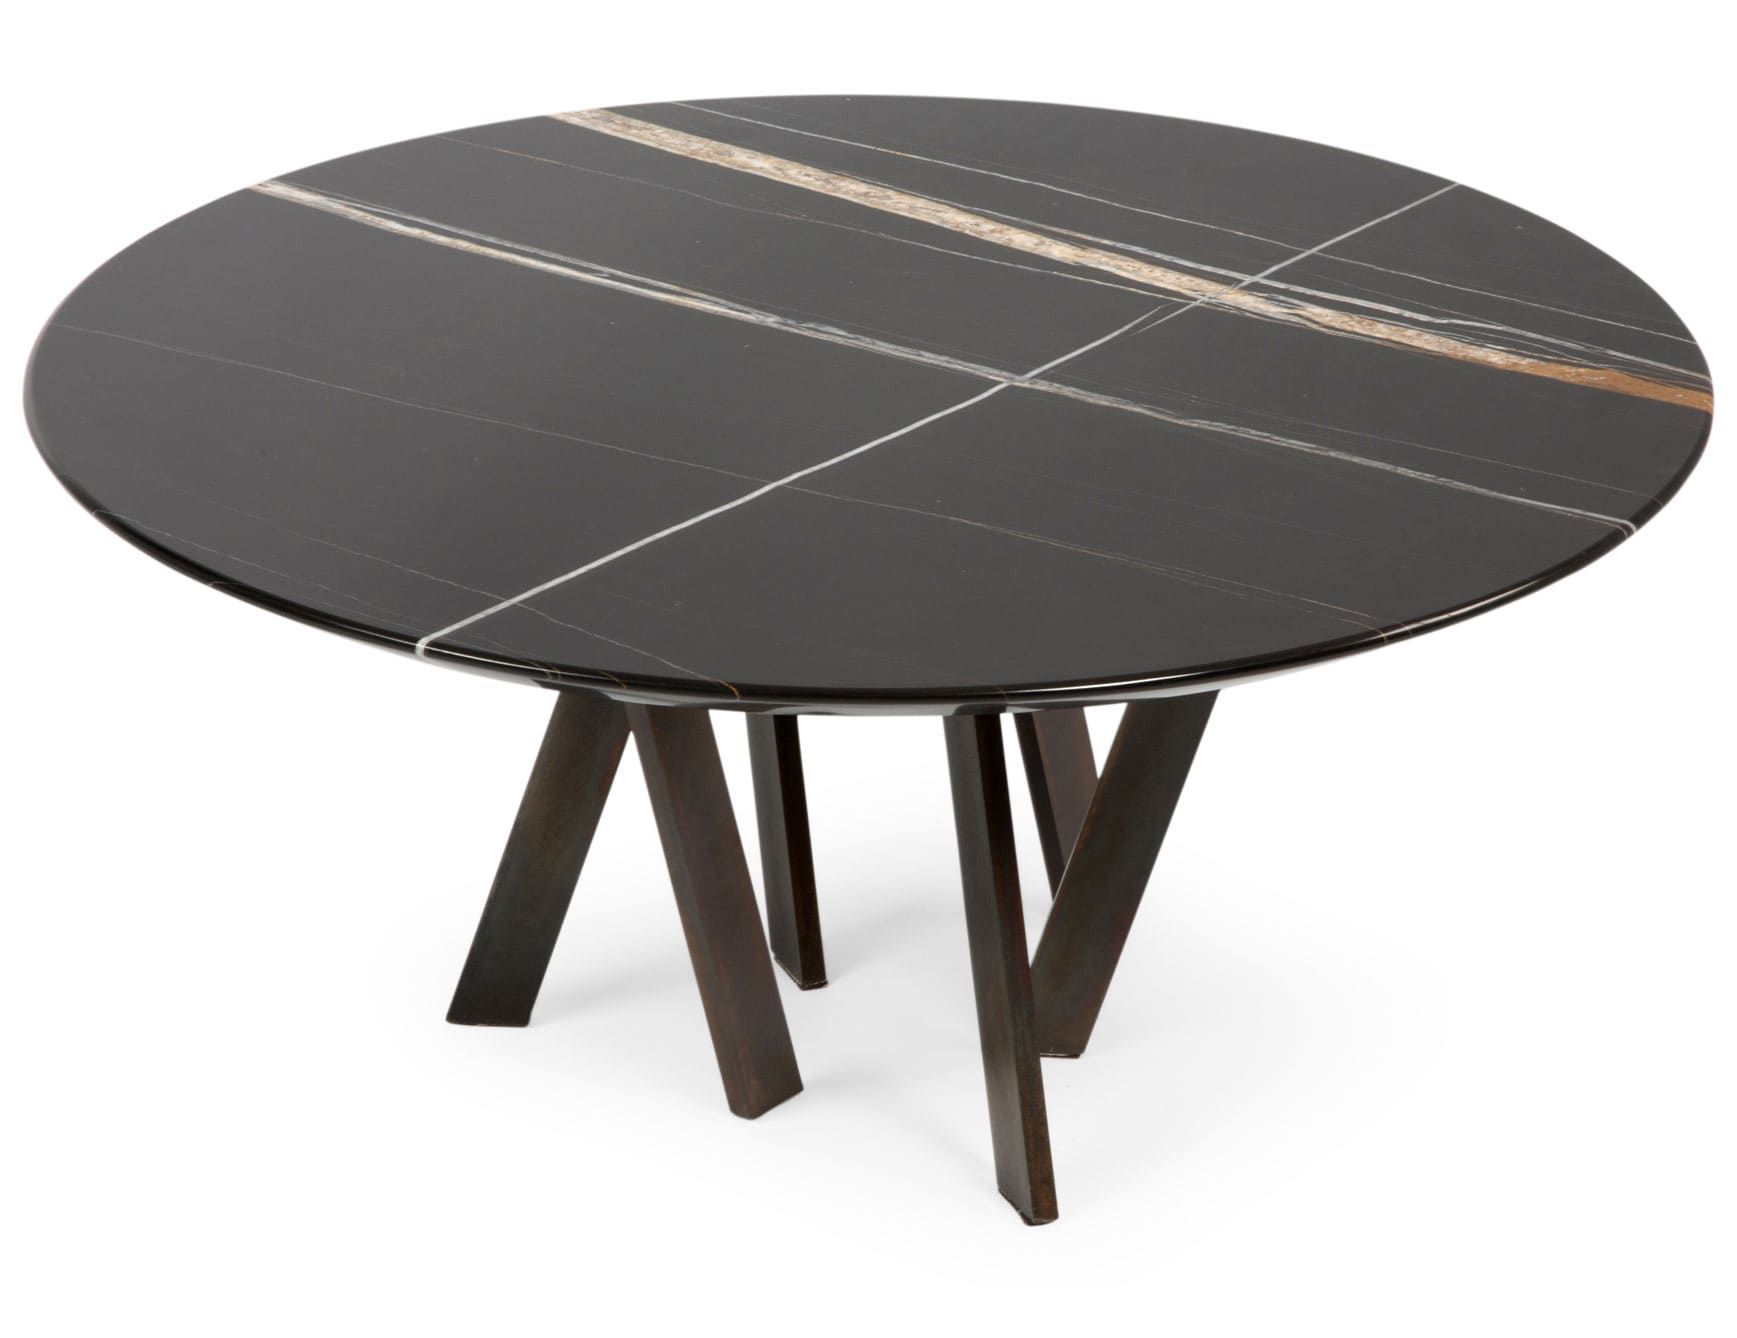 For Hall modern luxury side table with brown Sahara Noir marble